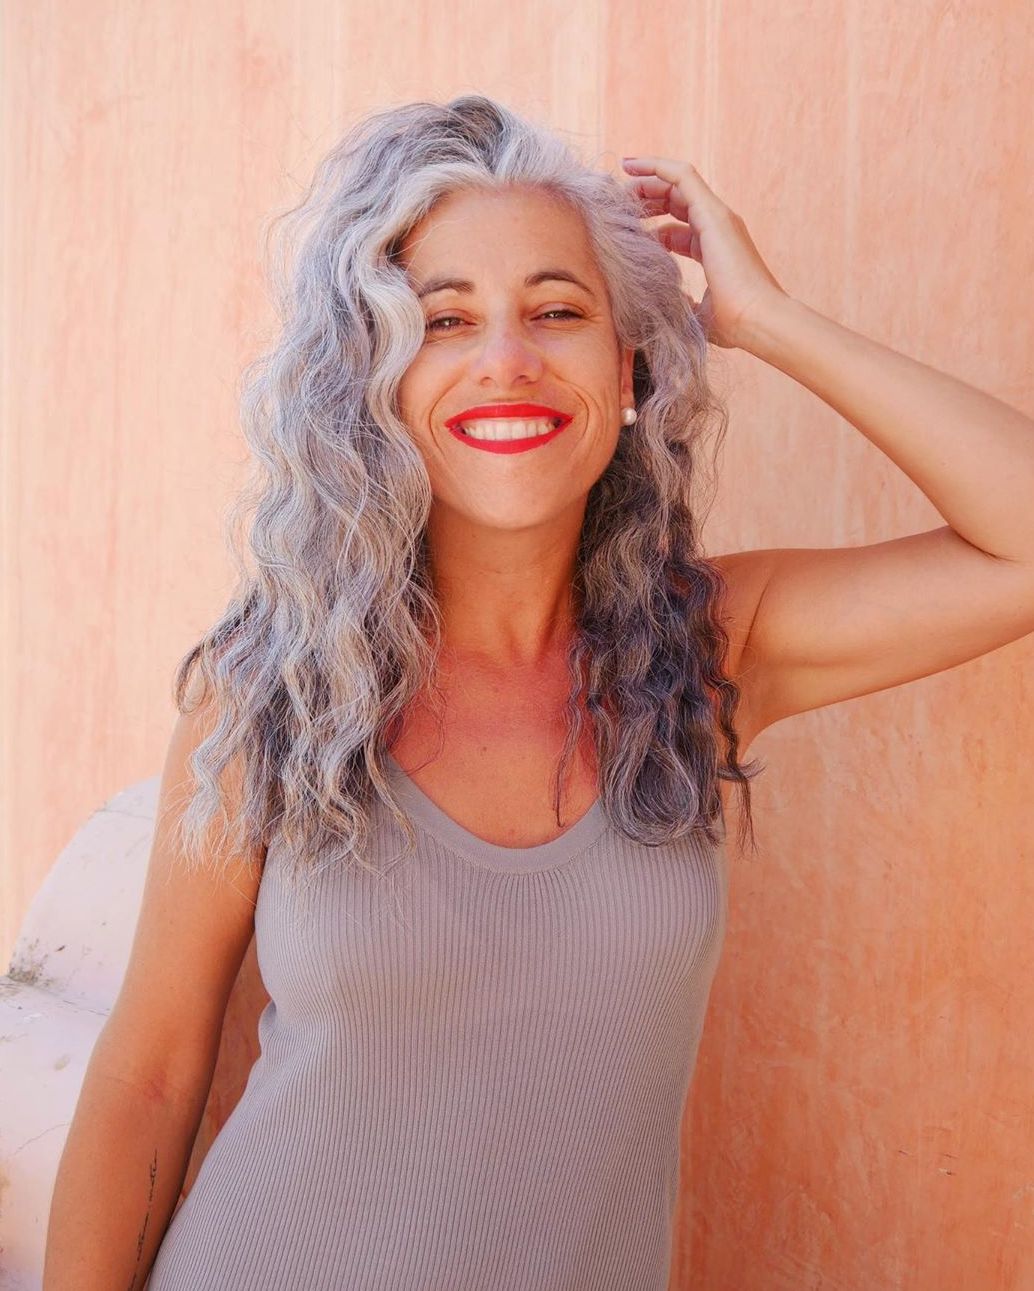 Silver Sisters and Gray Hair Communities for Women on Instagram